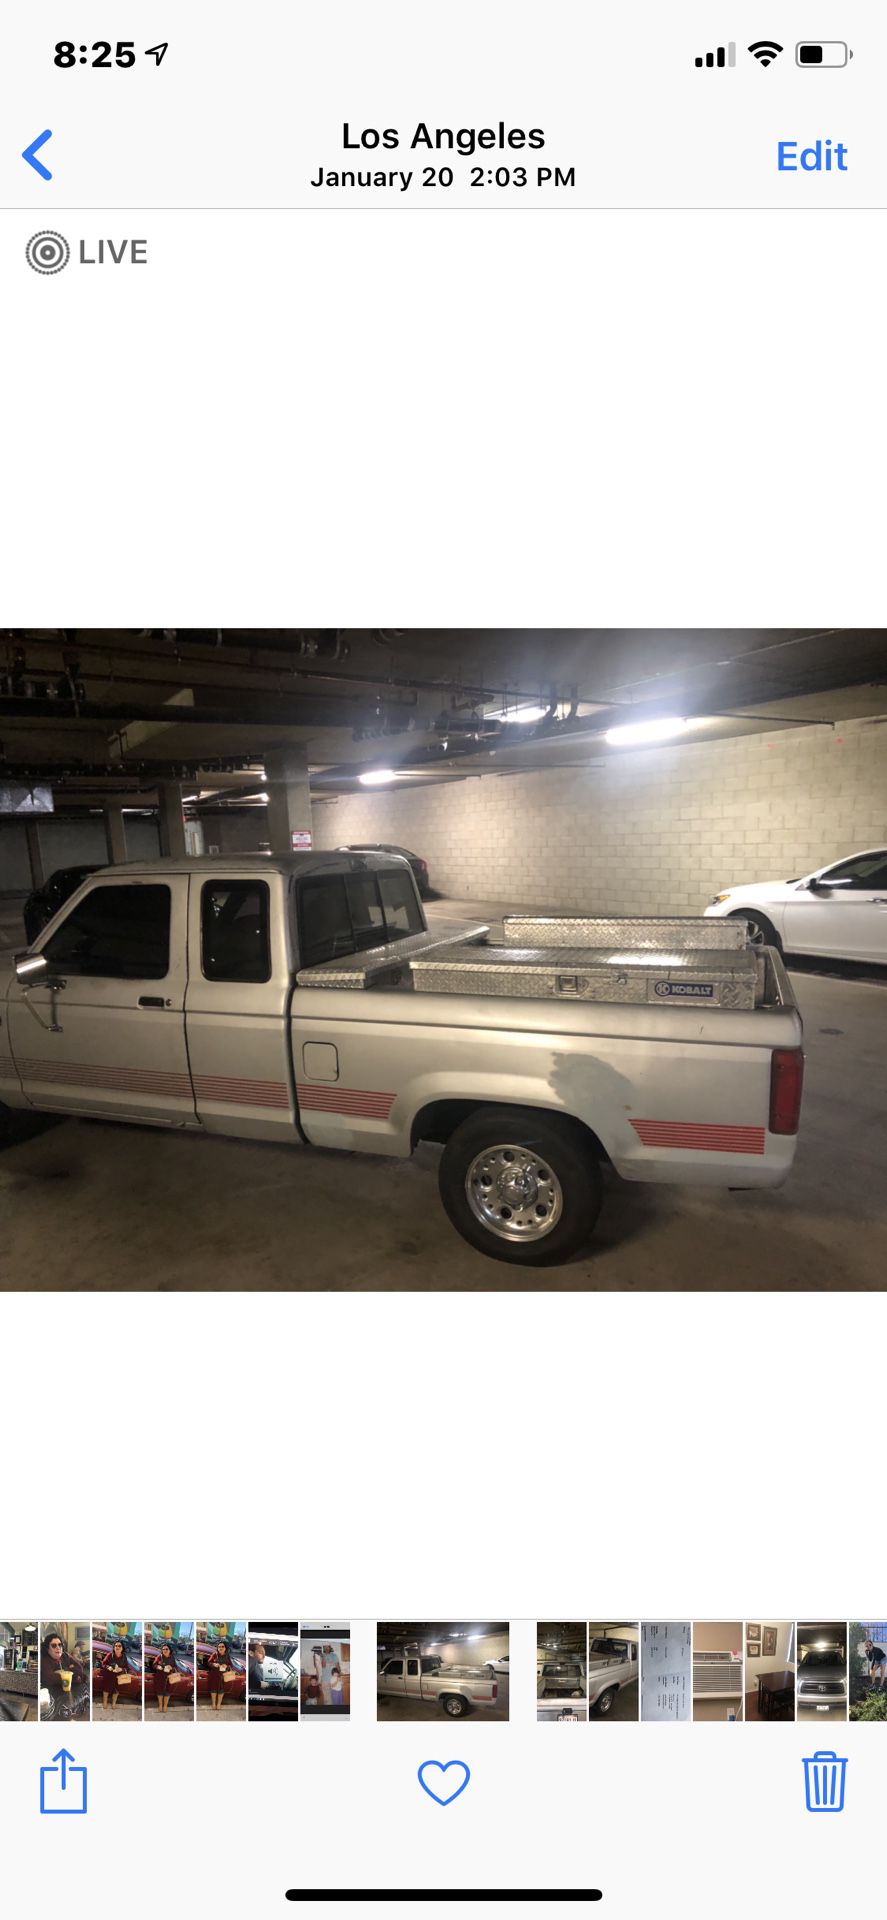 1991 ford ranger 95 thousand miles new tires runs great 3.0 engine looking to swap for a fishing boat